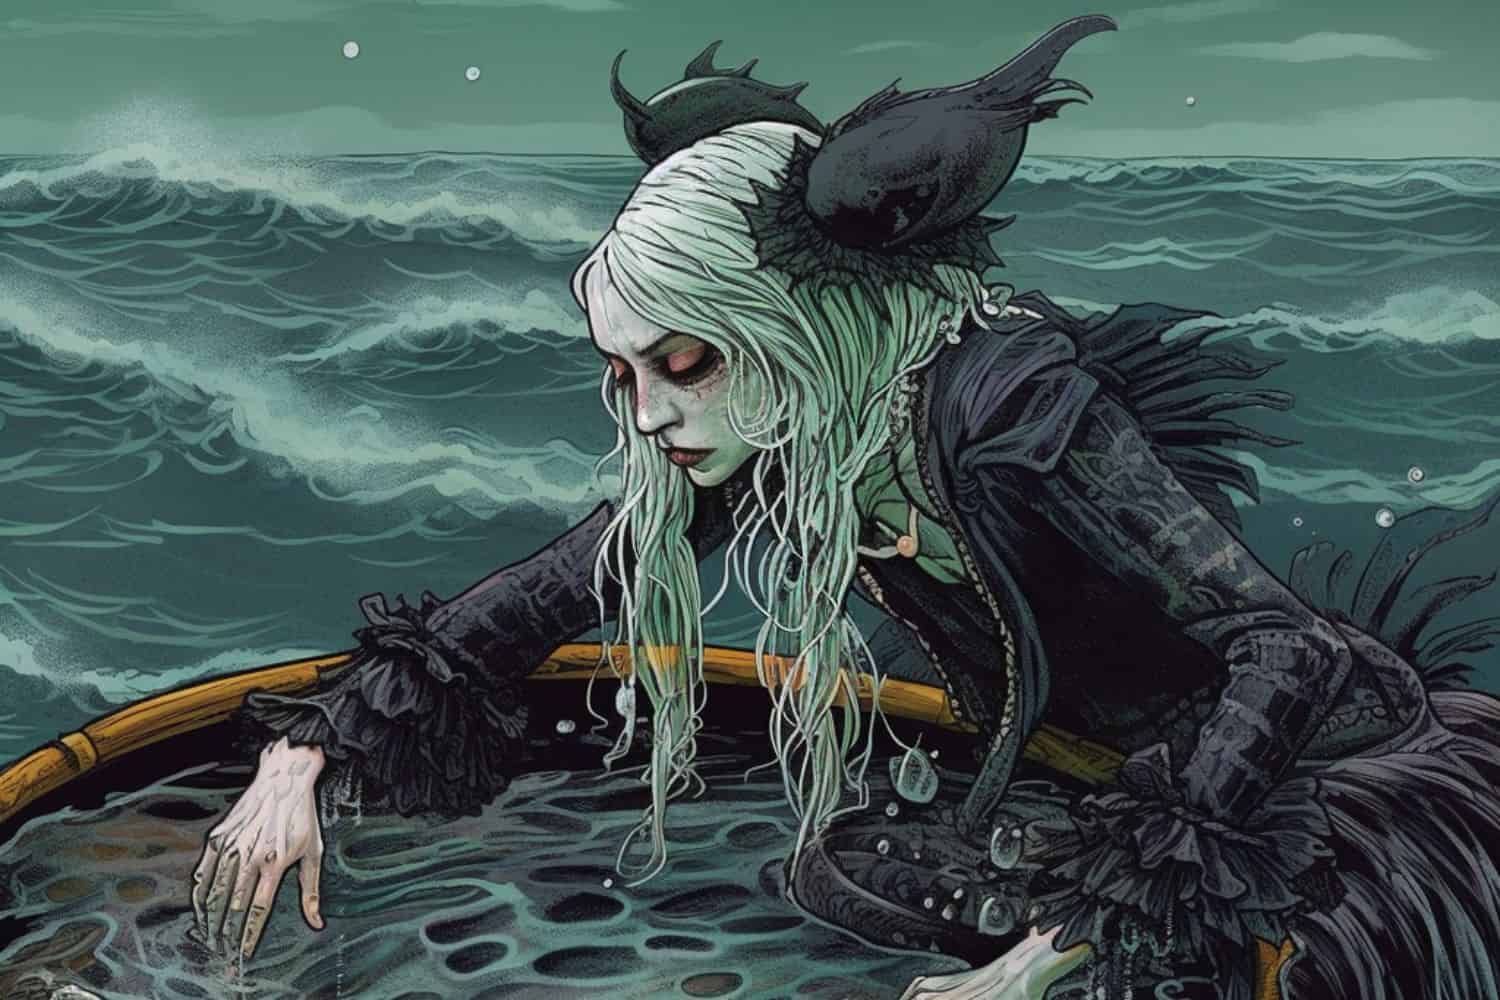 https://www.pagangrimoire.com/wp-content/uploads/2023/05/Sea-Witches.jpg